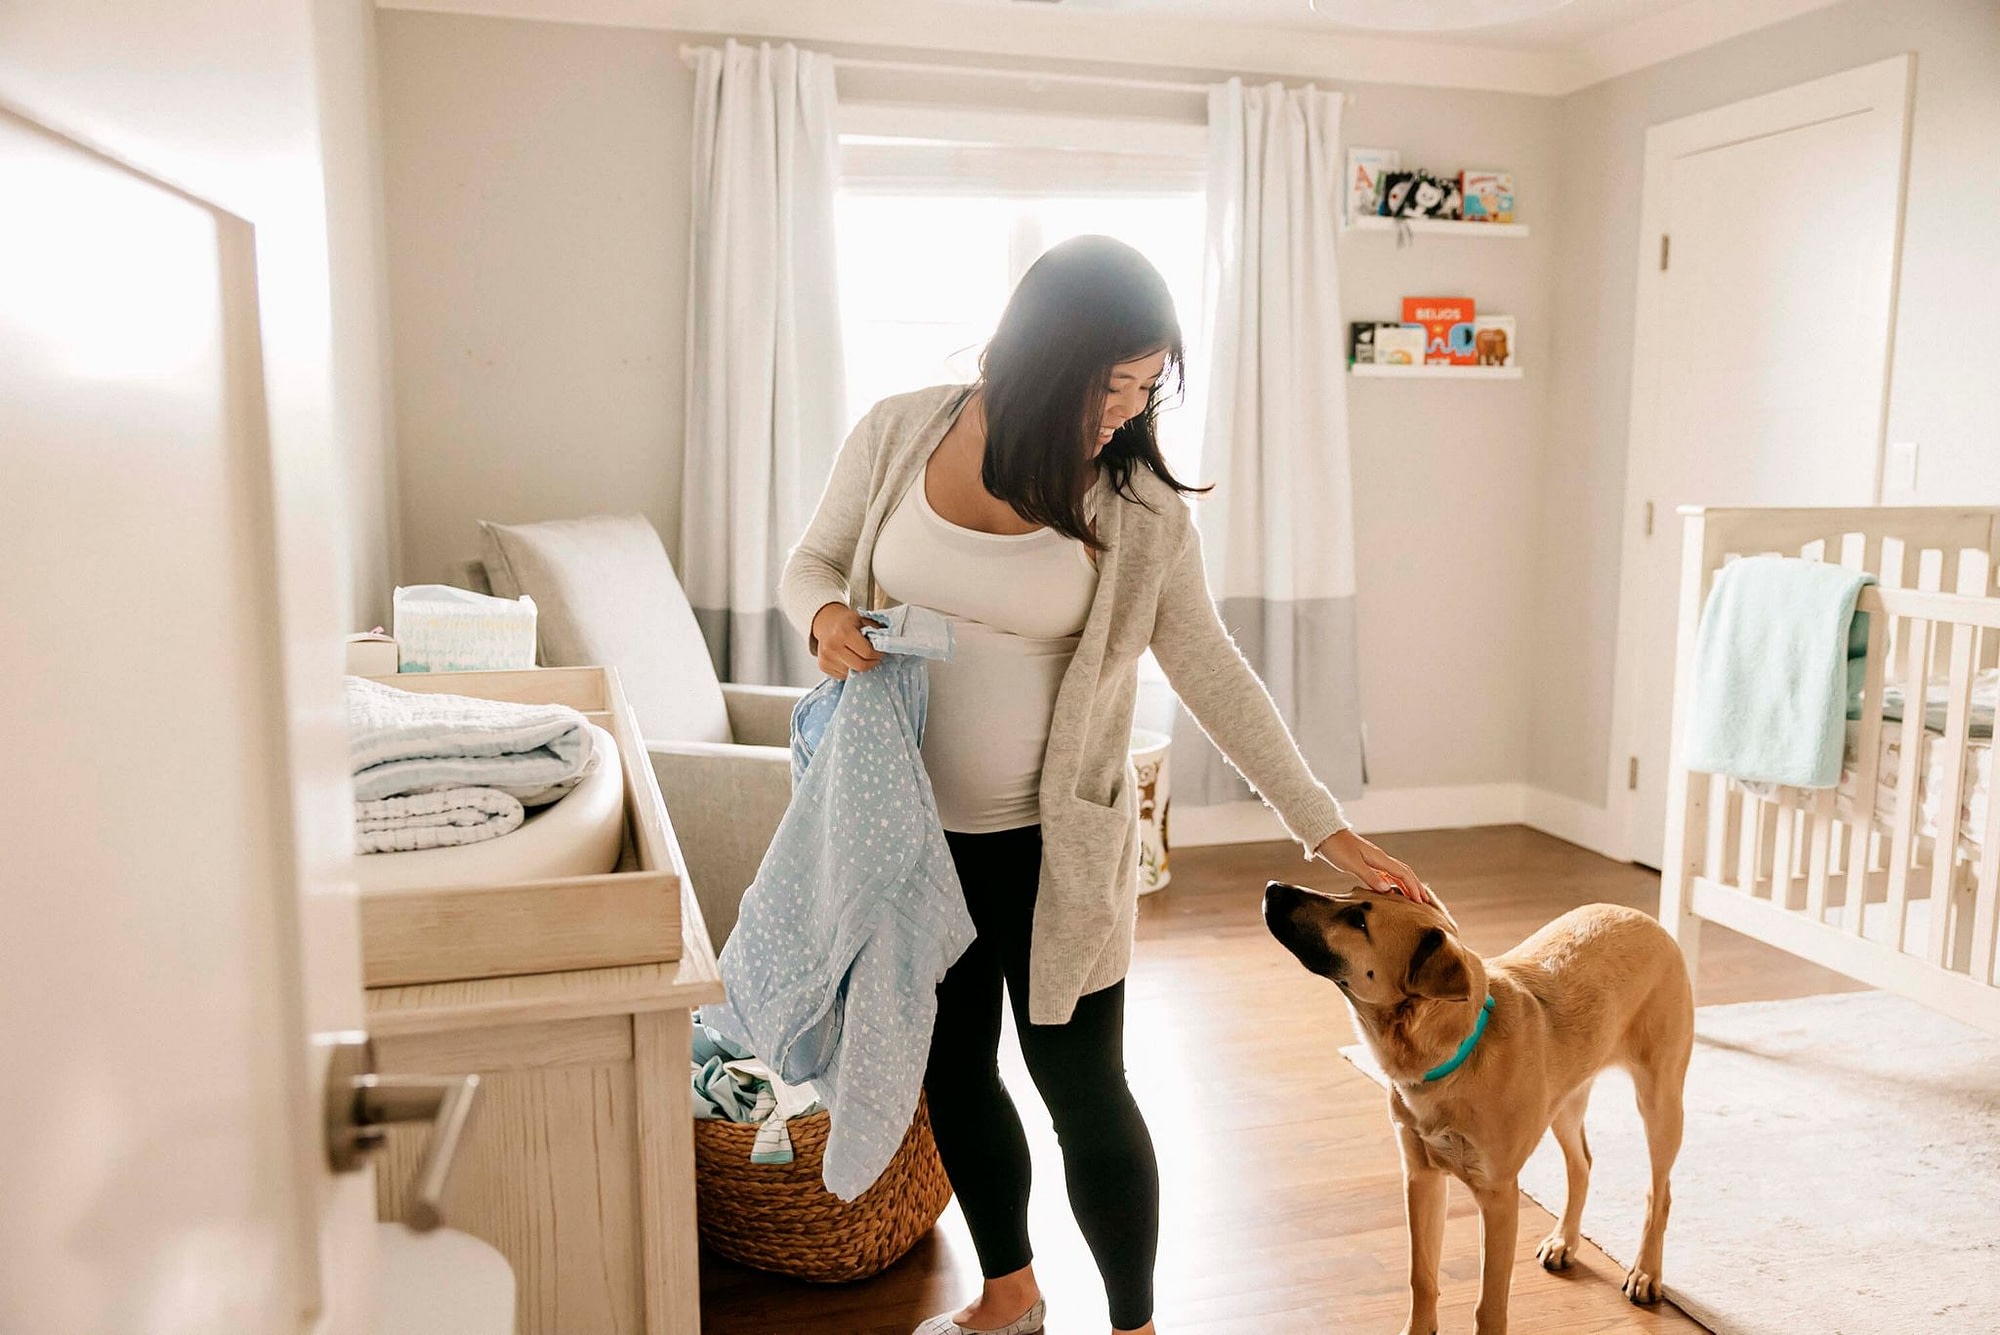 Woman Petting Dog While Putting Away Laundry